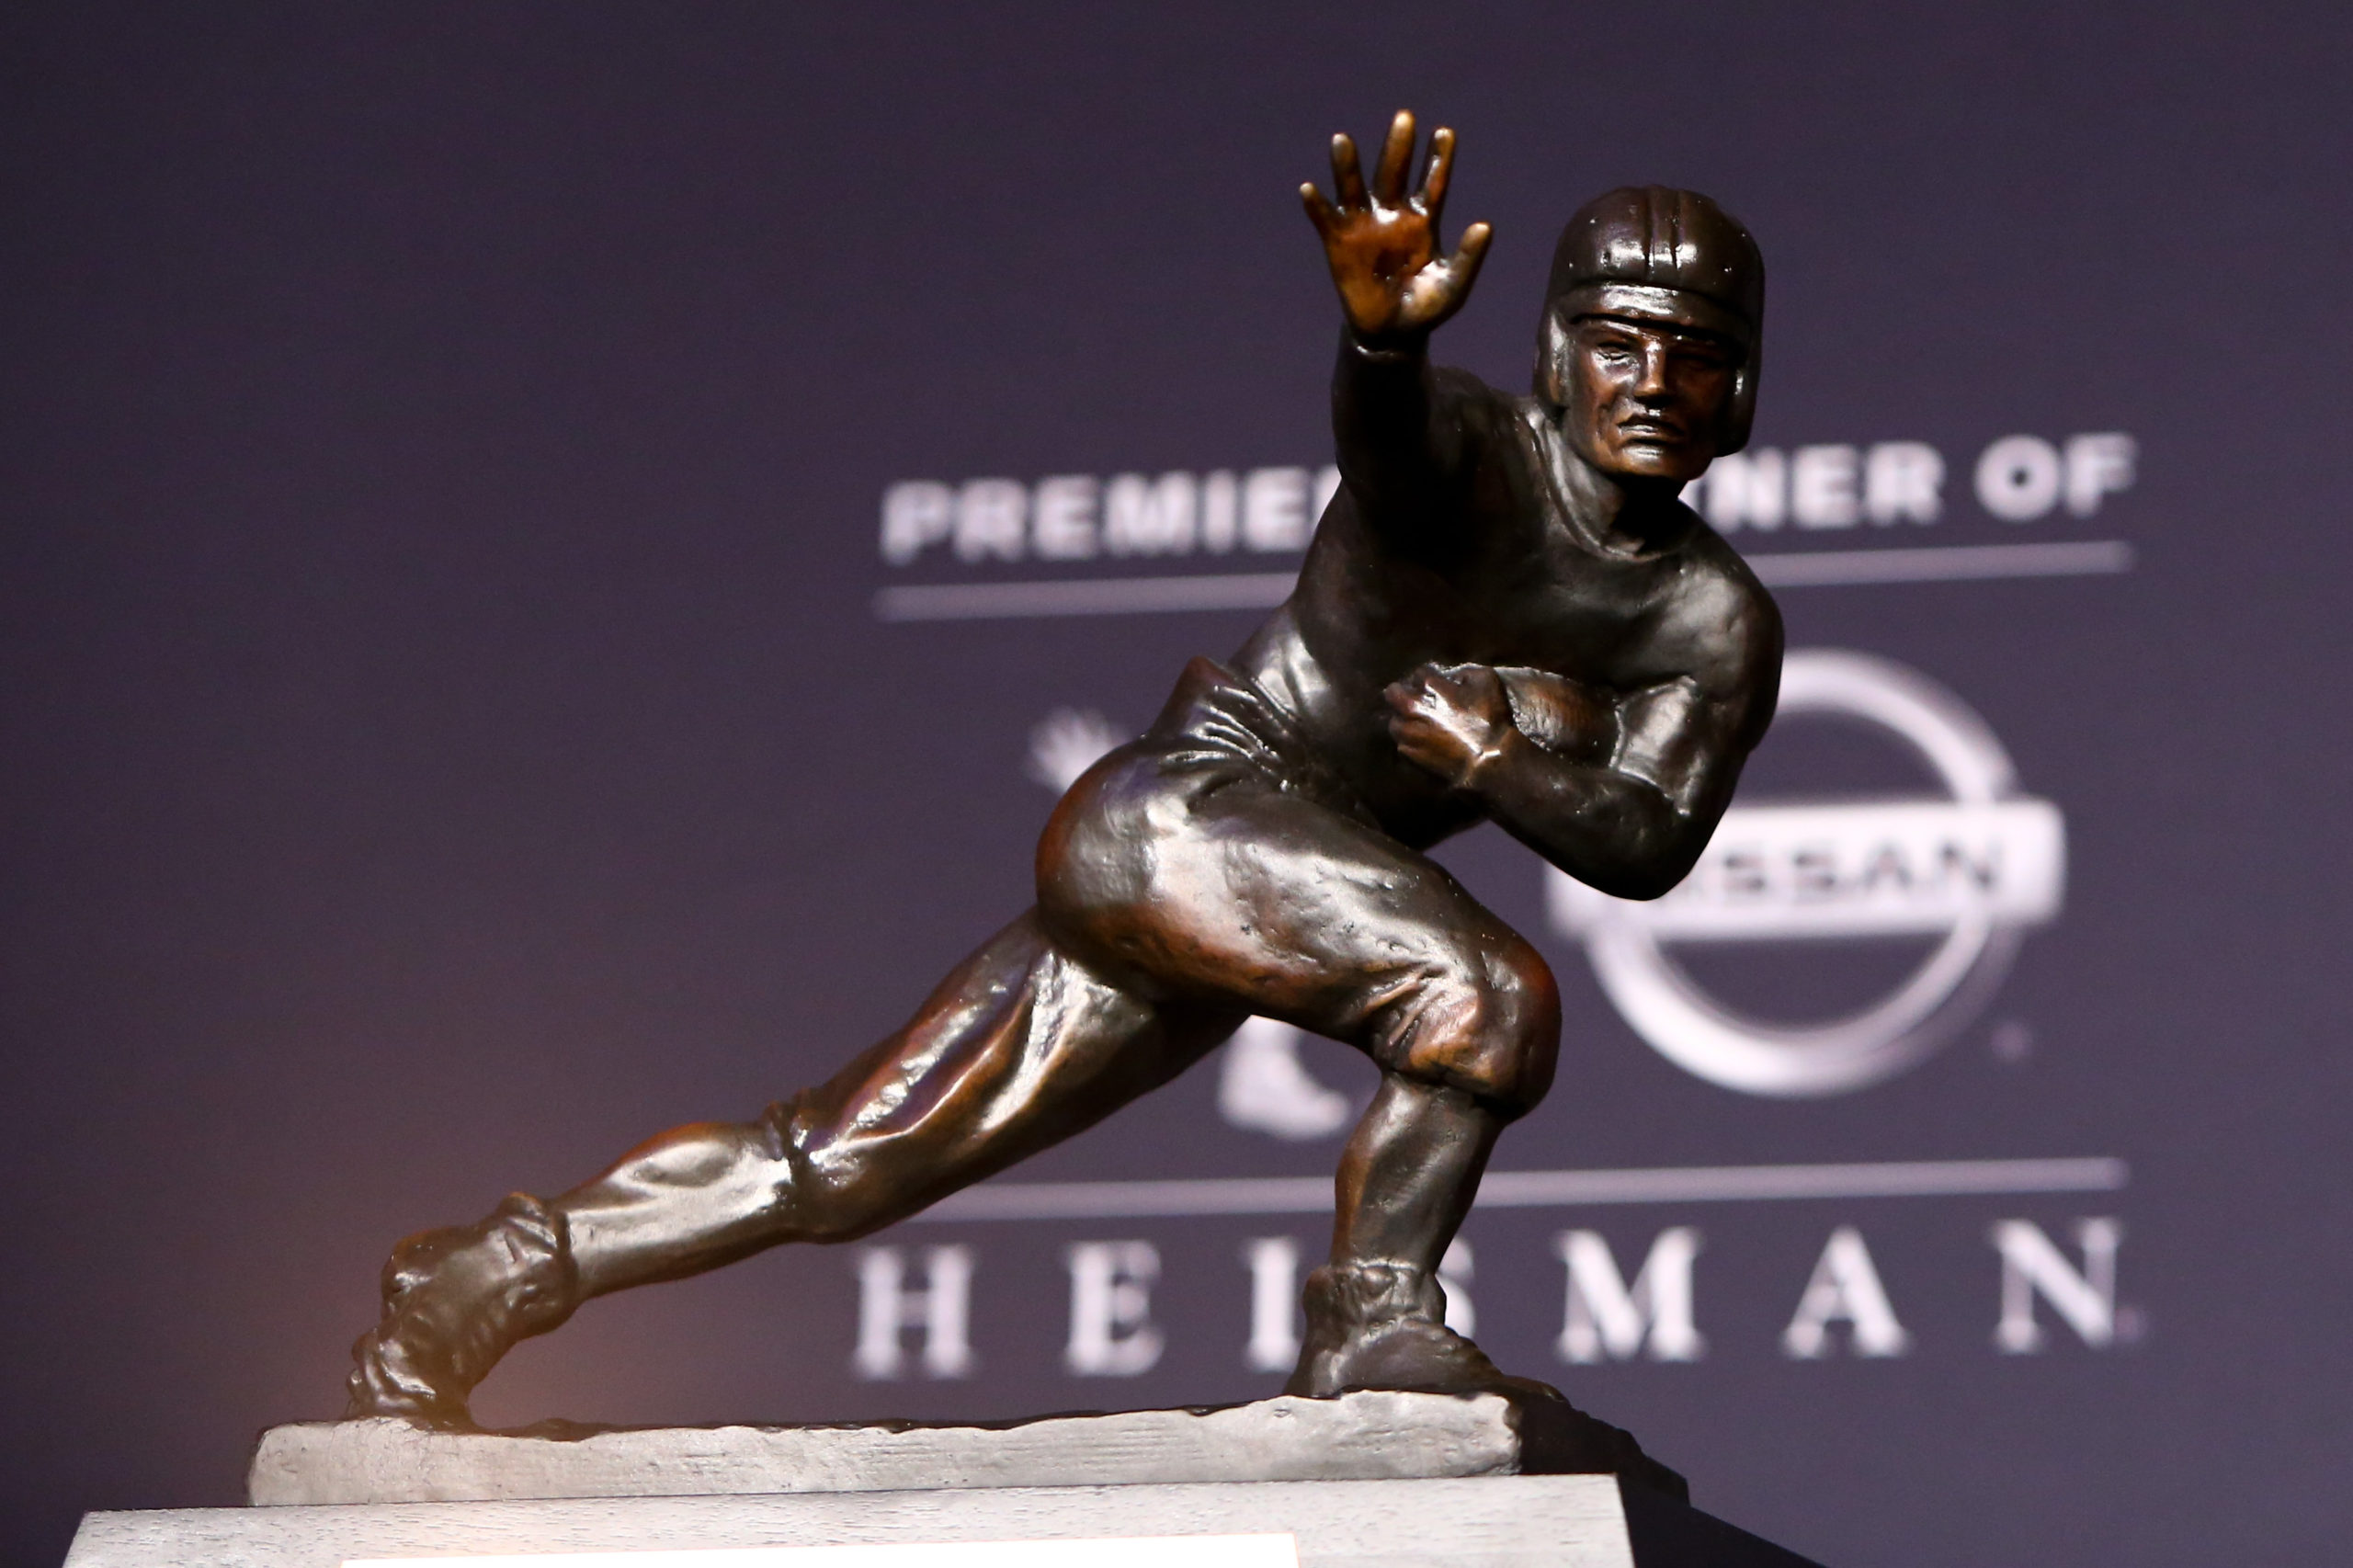 Who Are The Top 5 Early Heisman Trophy Candidates Headed Into 2019?